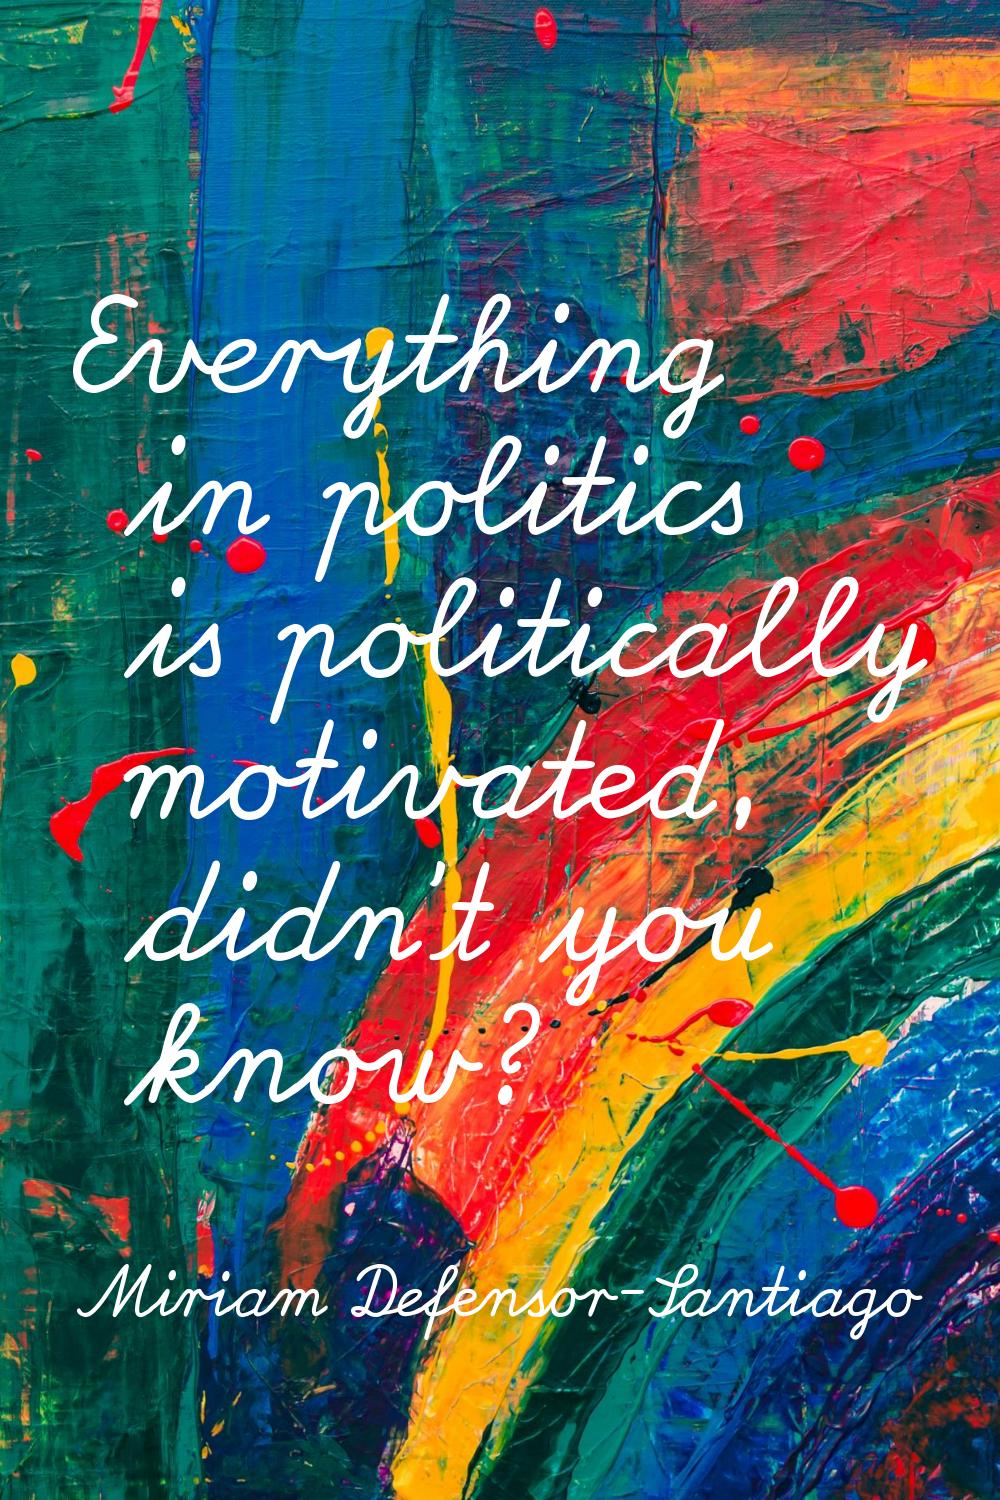 Everything in politics is politically motivated, didn't you know?